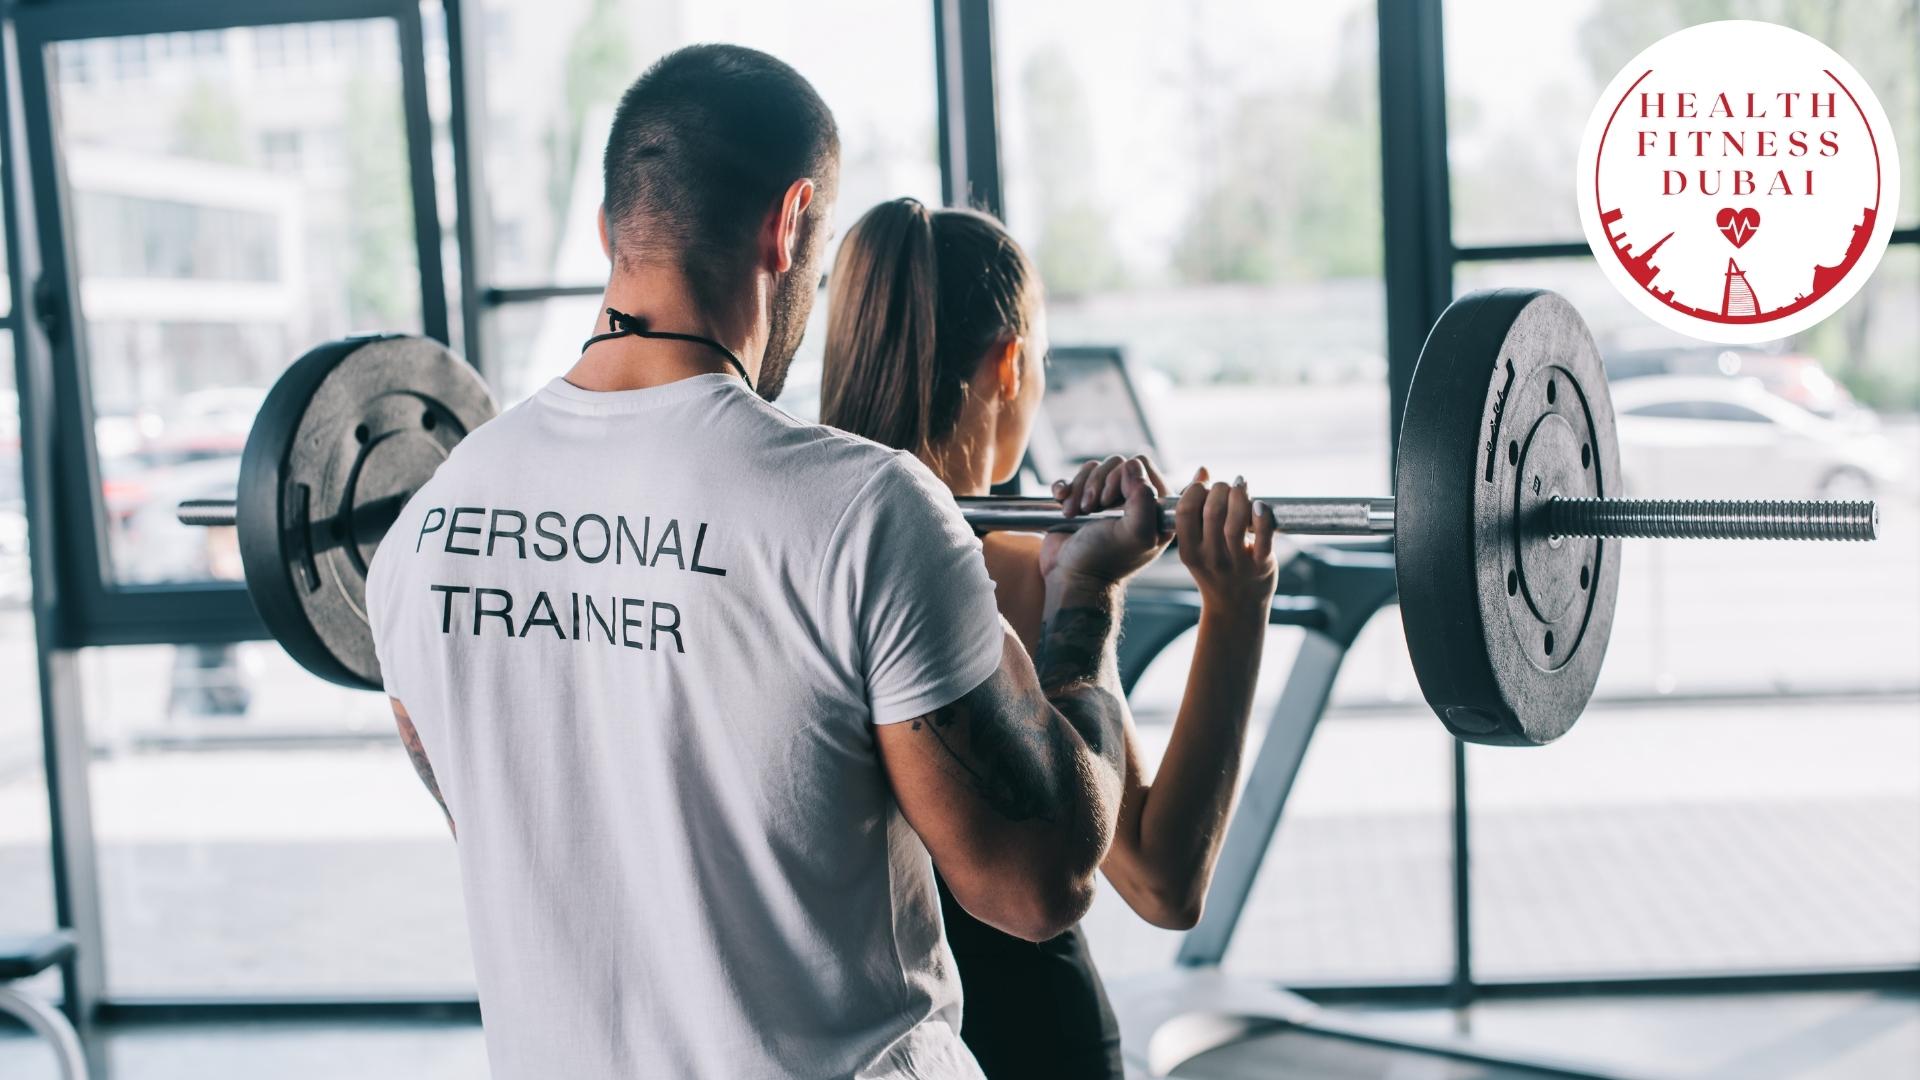 Benefits of Personal Trainer and Personal Training - Health Fitness Dubai UAE Online - 1